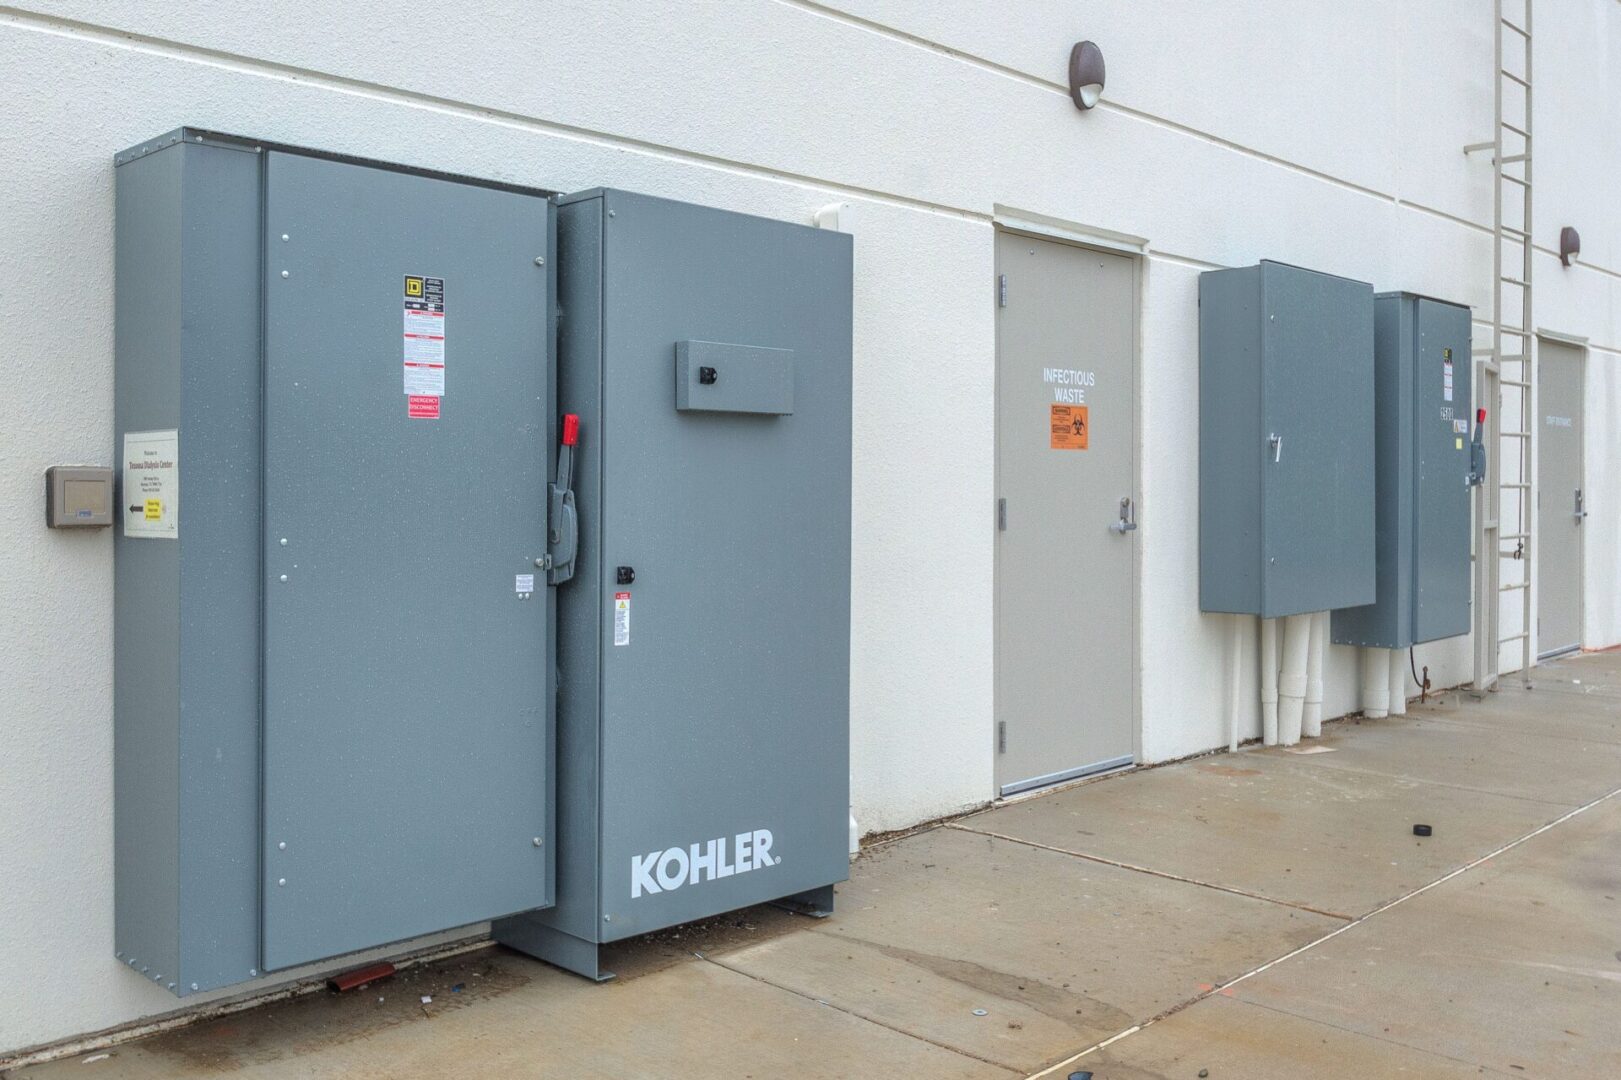 Three electrical boxes are lined up against a wall.